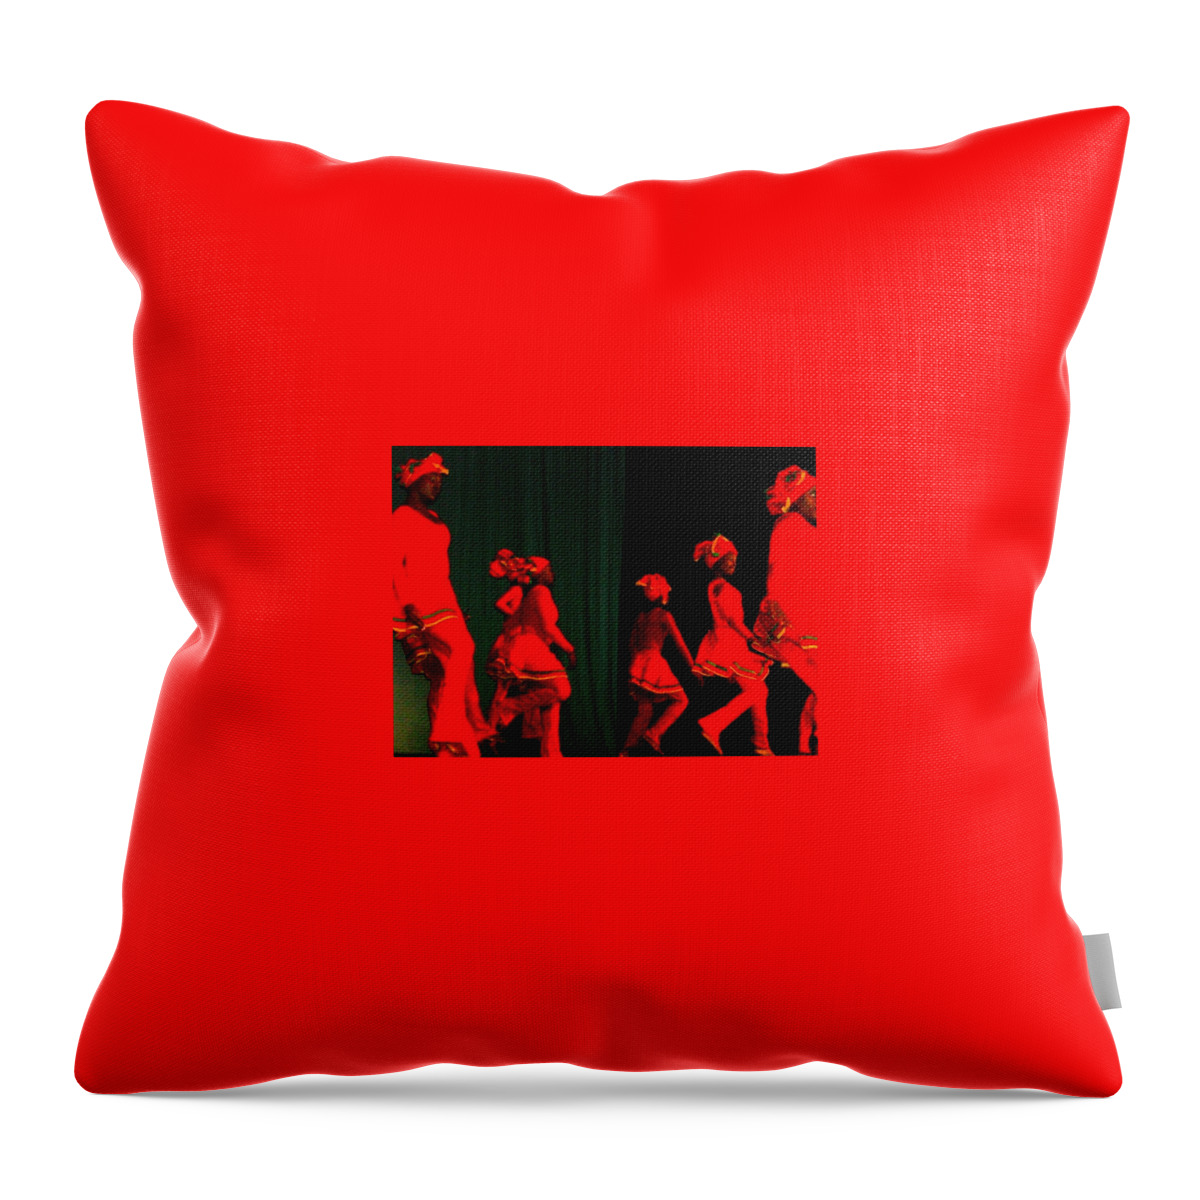  Throw Pillow featuring the painting Redemption by Trevor A Smith